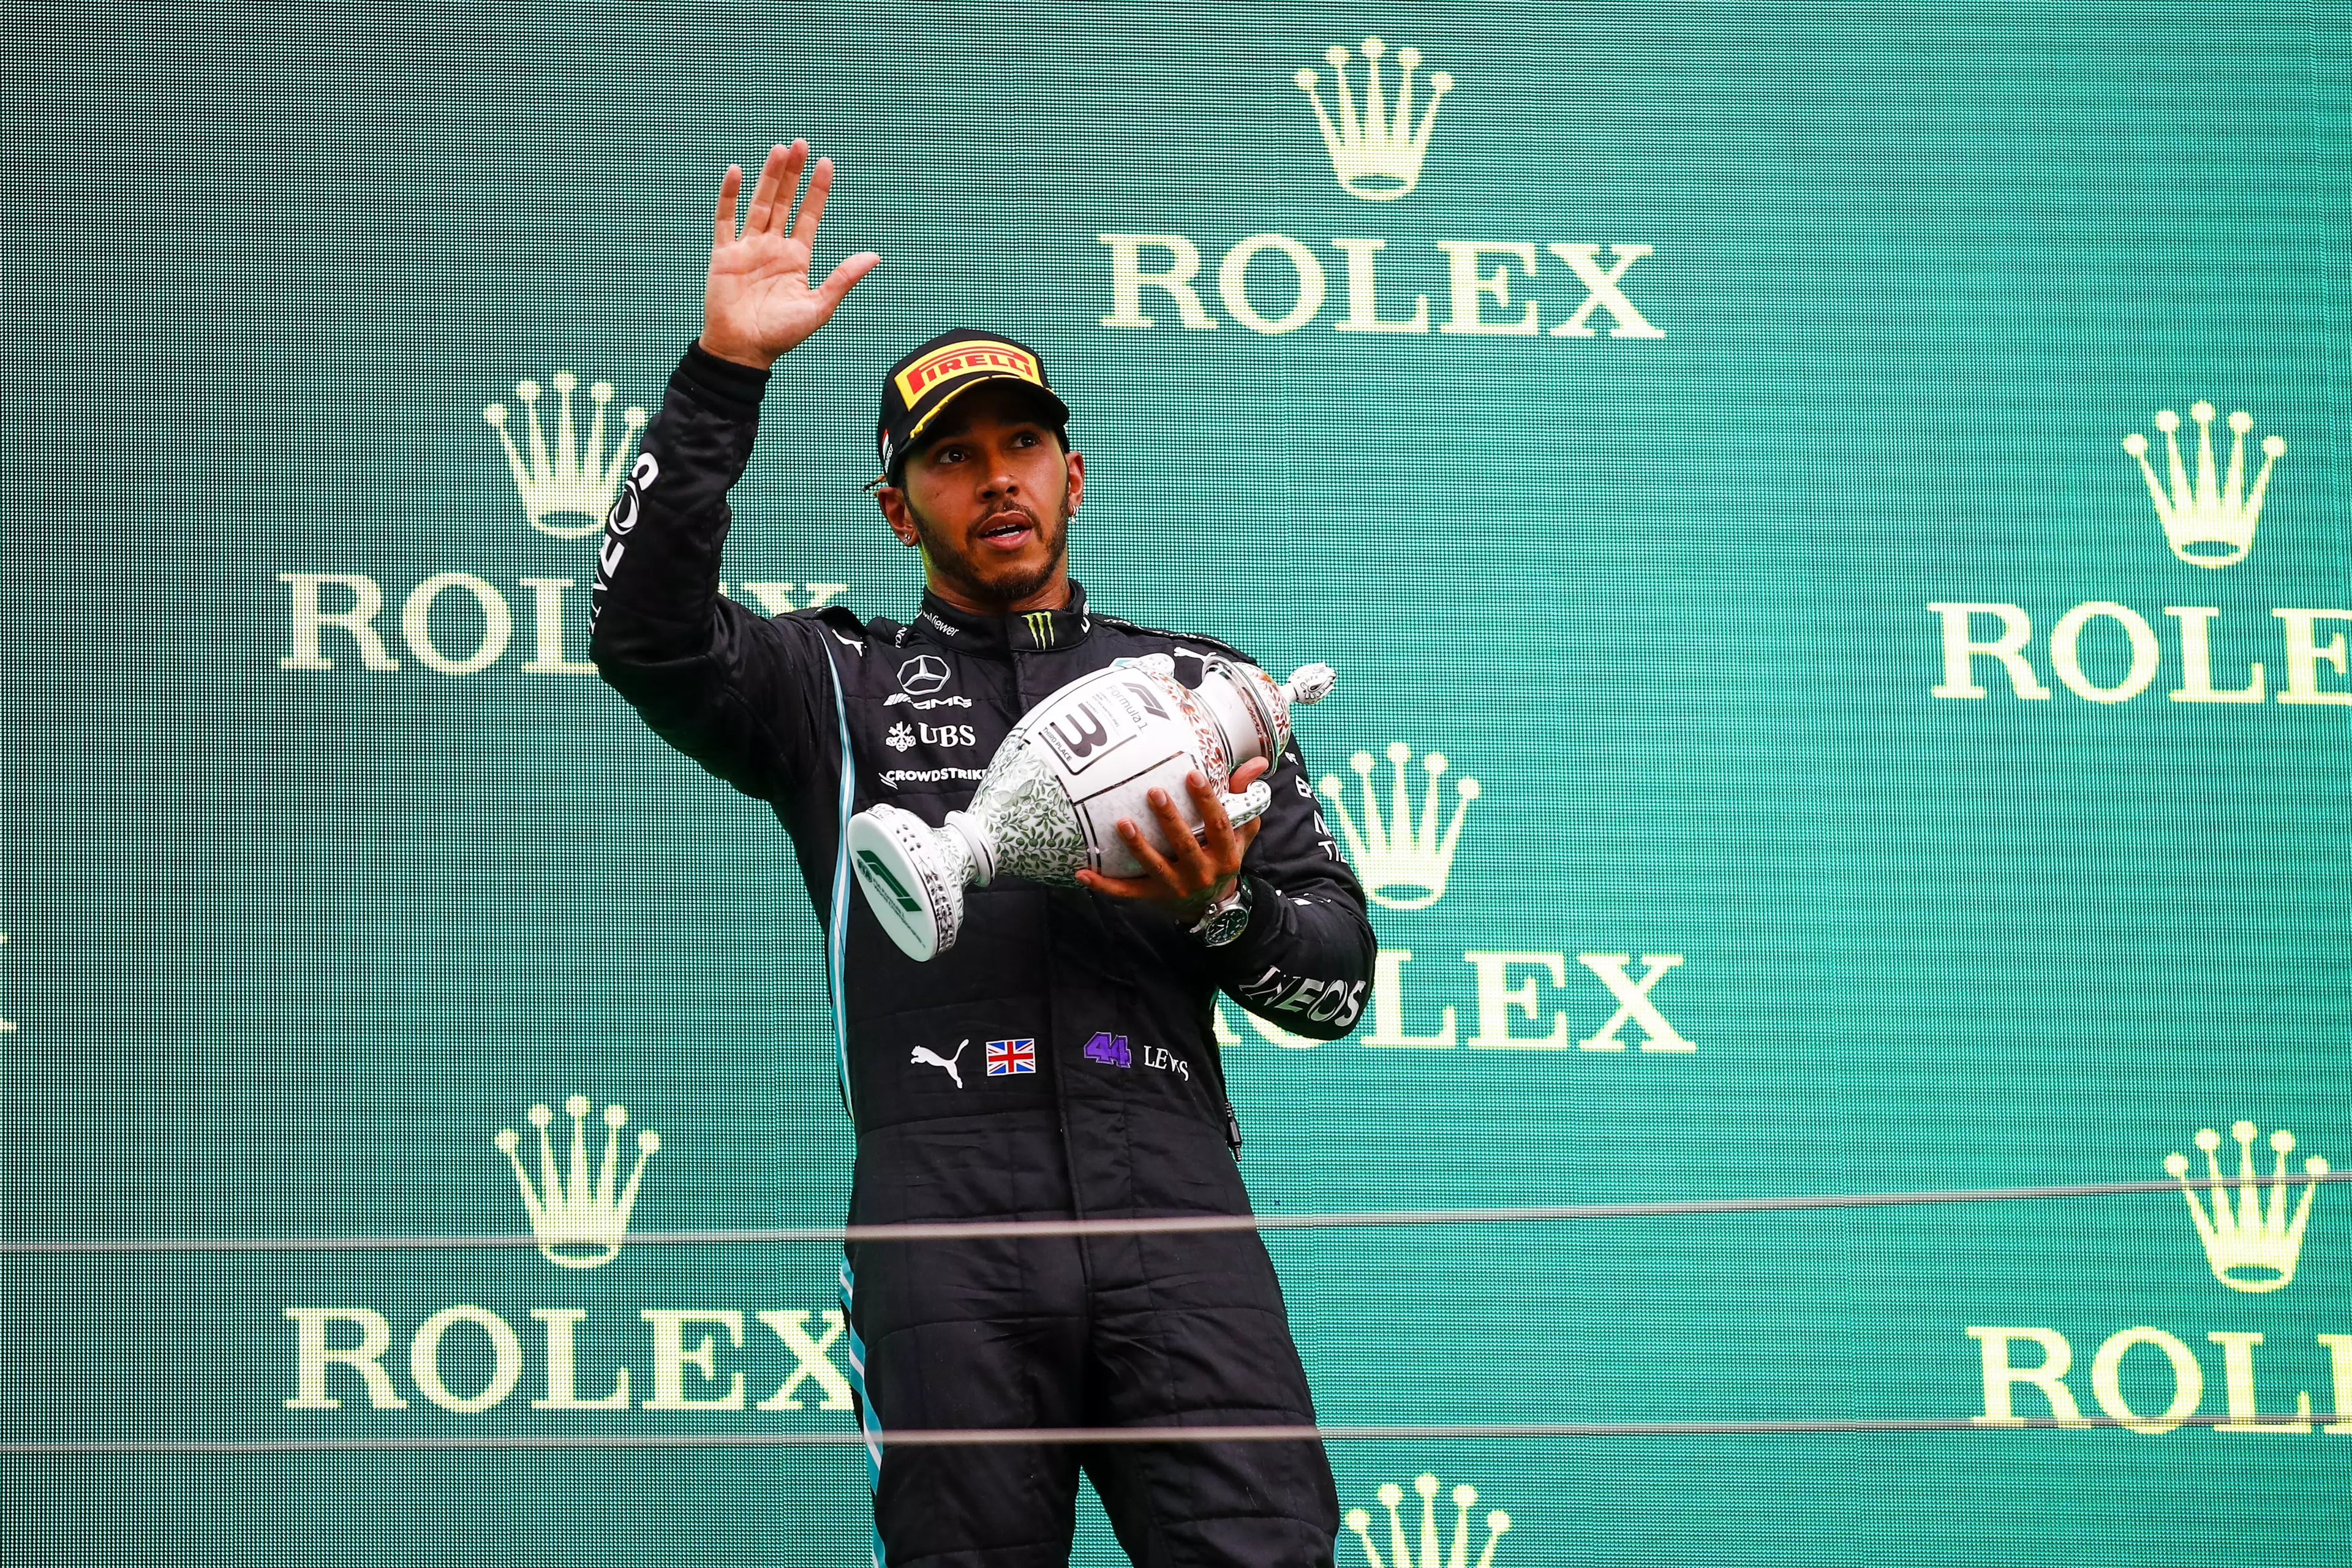 Hamilton wasn't looking his usual self on Sunday. Image: PA Images